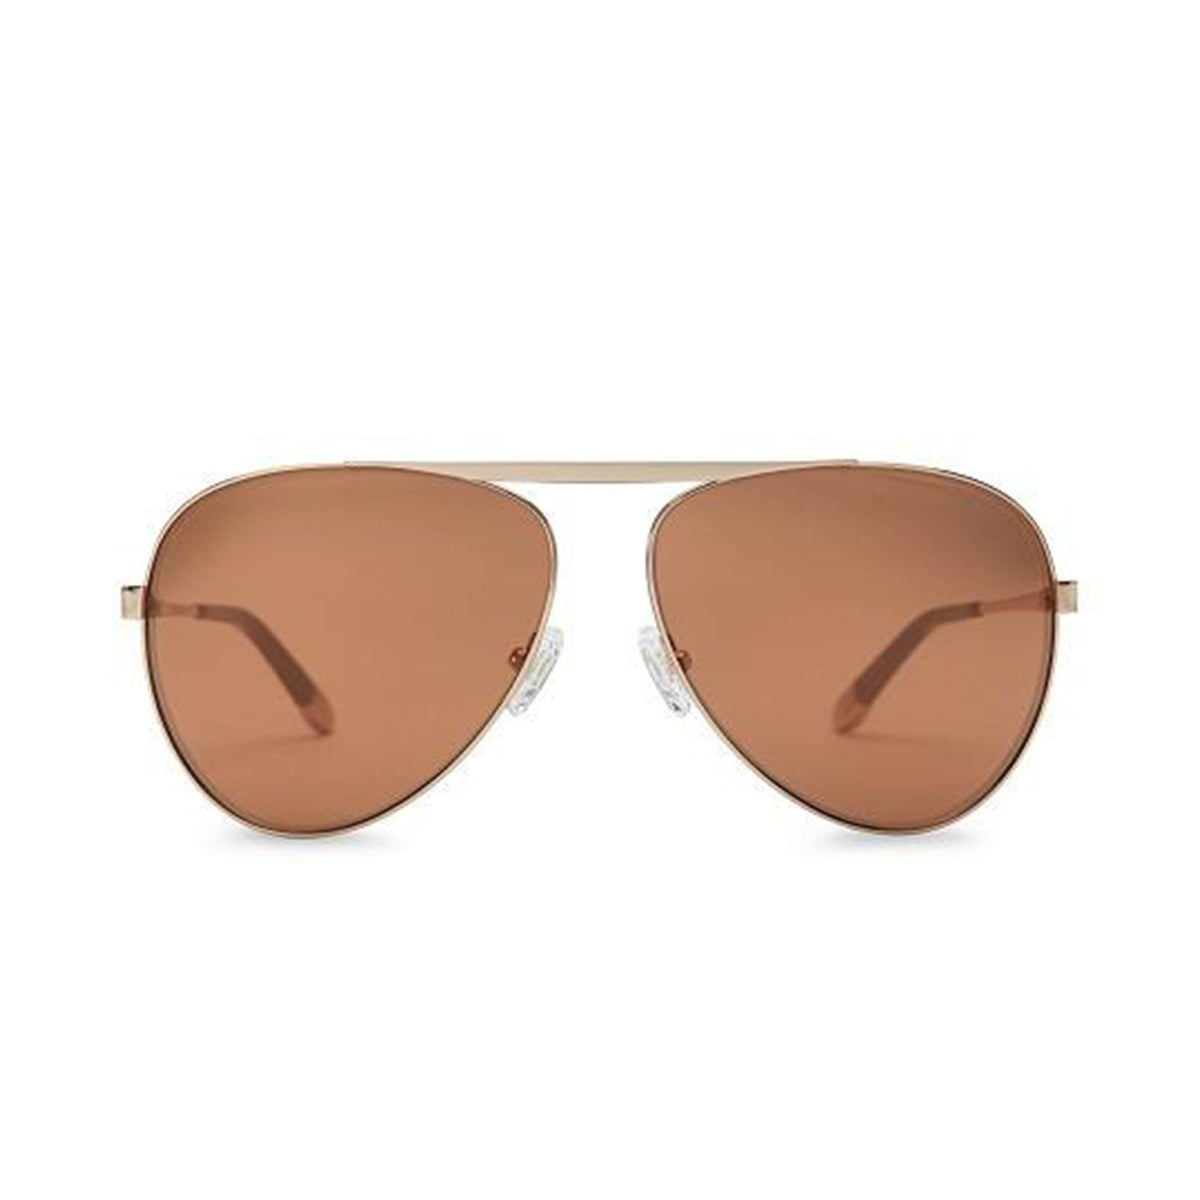 WISH YOU WERE HERE | CHAMPAGNE TAN aviator sunglasses with mirrored lenses